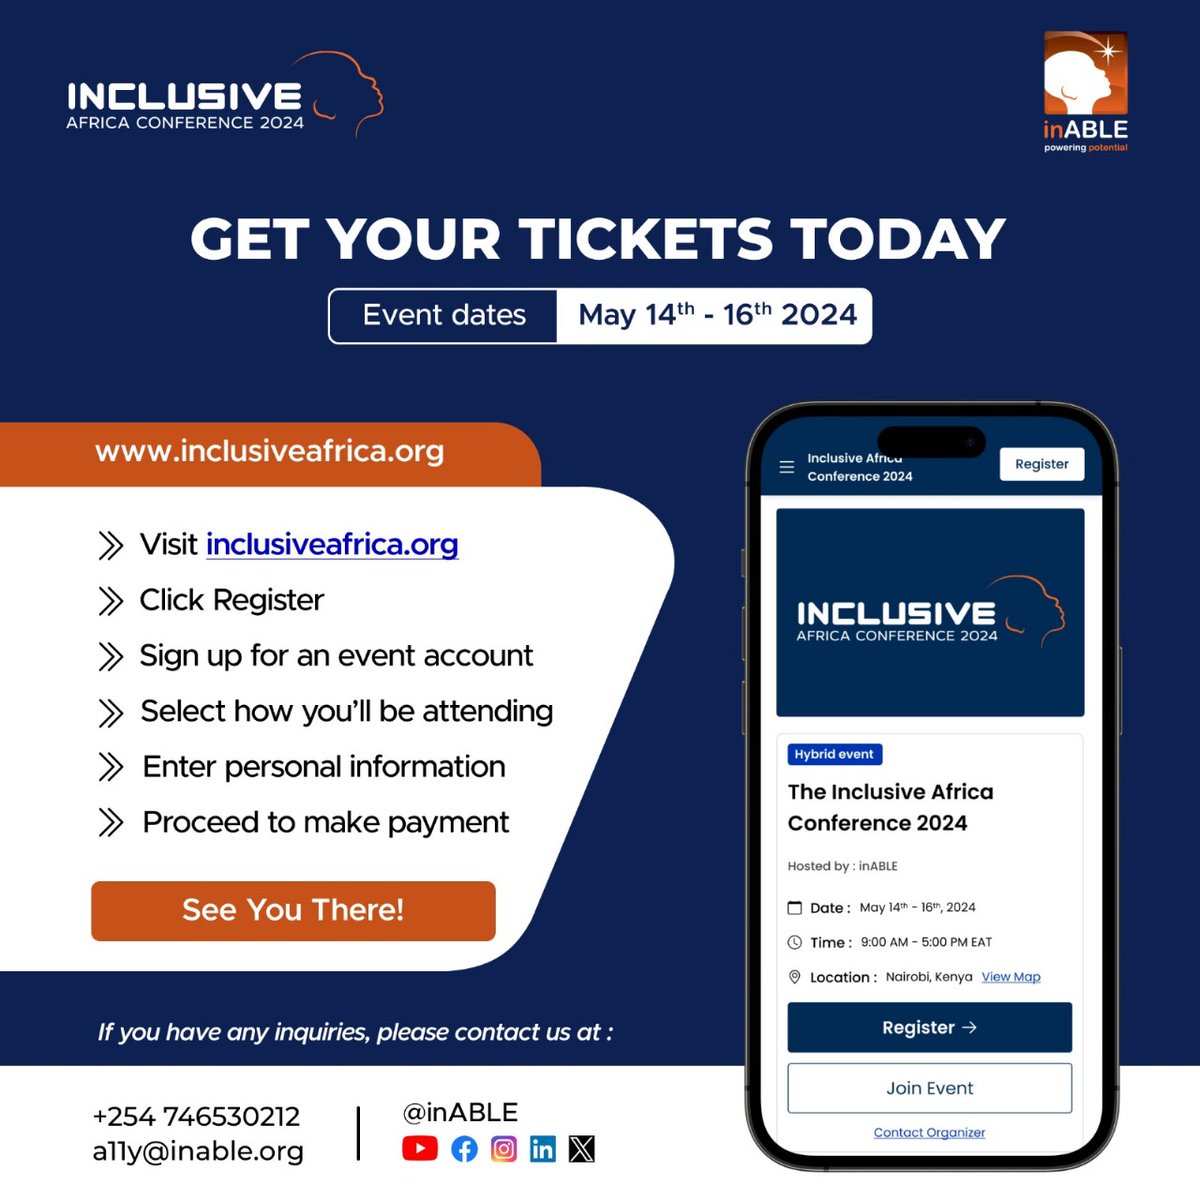 InABLE #kenya #Uganda #rwanda #KwibukaTwiyubaka 
REGISTER NOW FOR THE INABLE@24

Be part of the revolution, witness cutting edge technologies come to life for inclusion @inABLEorg